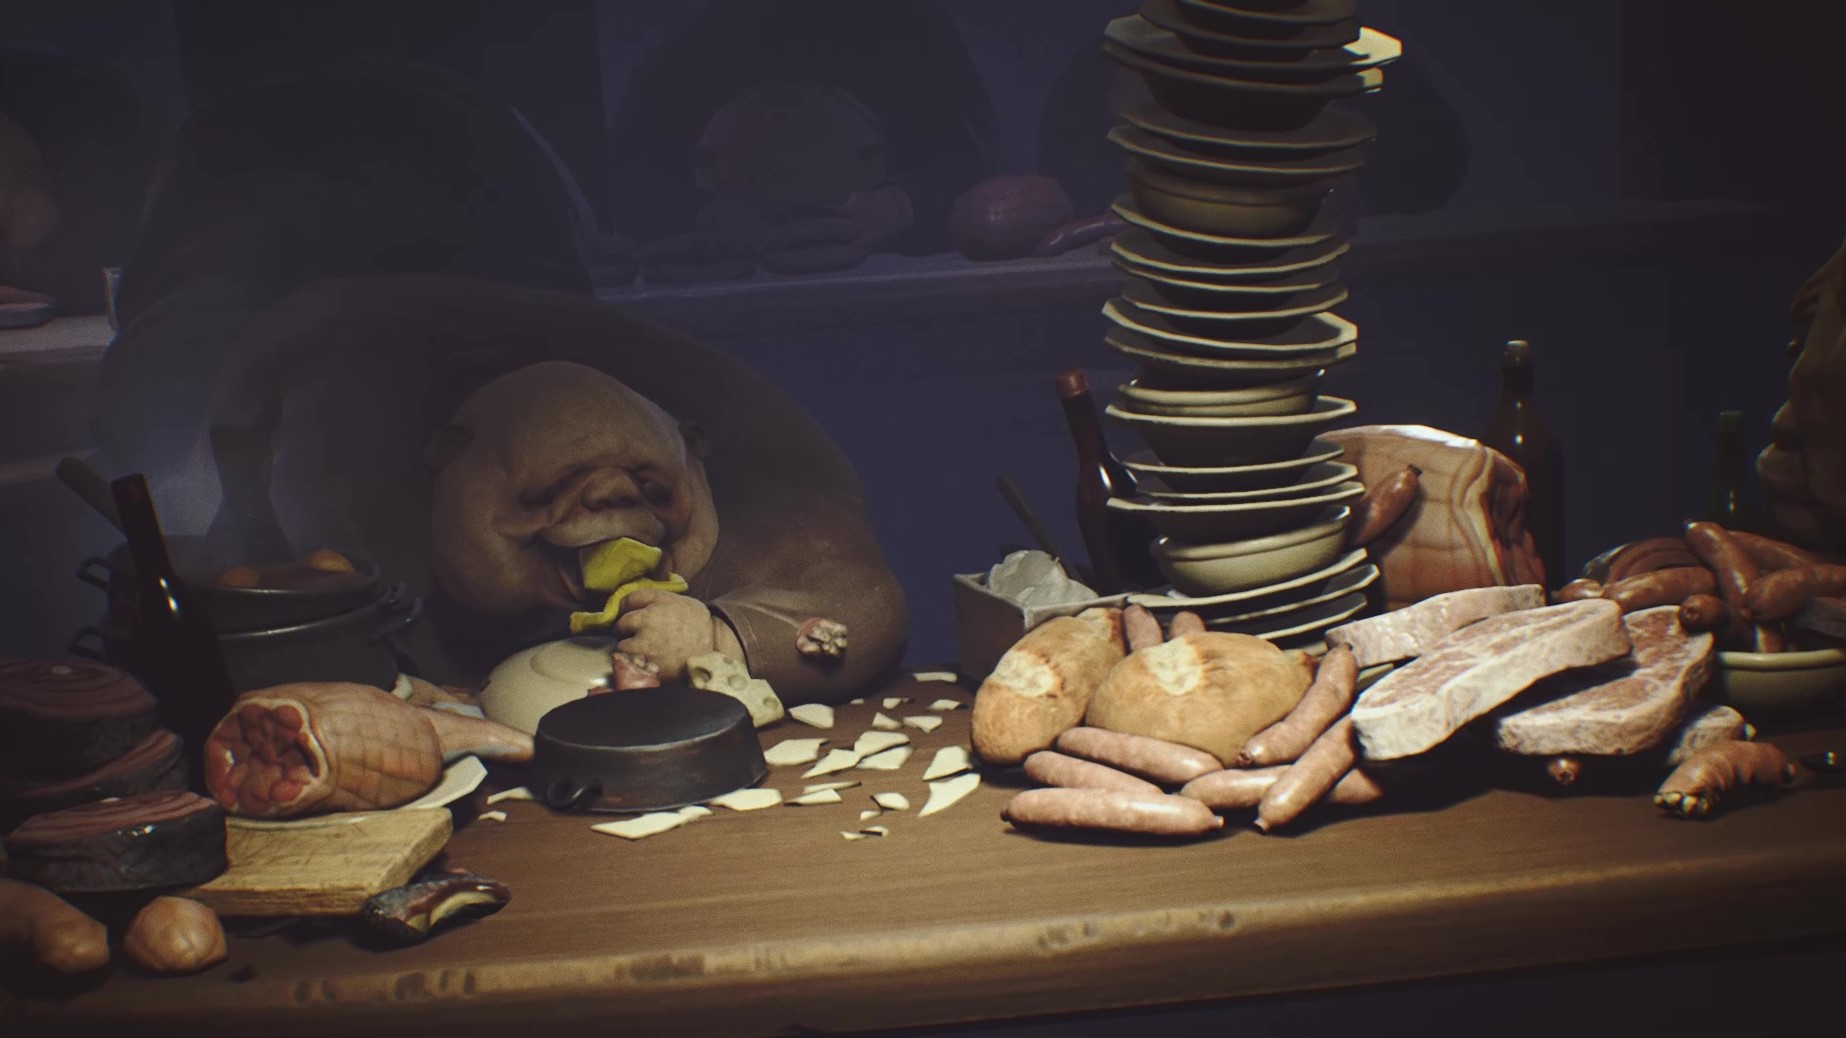 Little Nightmares 3 ruled out by creator but not by Bandai Namco